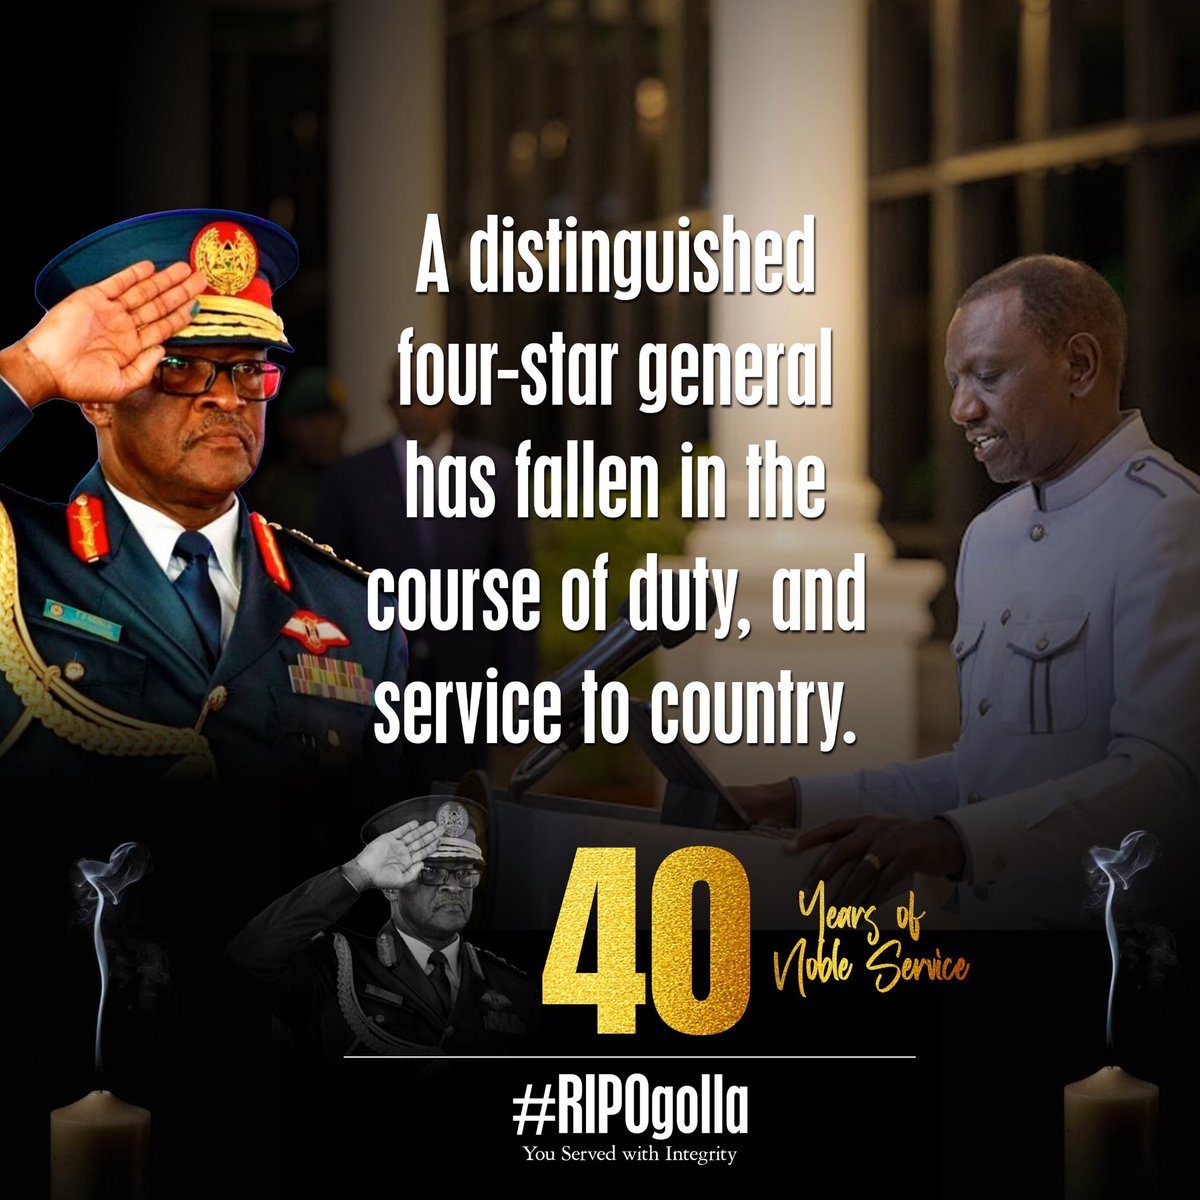 General Ogolla joined military on April 24 1984. Through his career, general Ogolla demonstrated an unwavering commitment to duty, professionalism and personal development. General Ogolla trained as a fighter pilot and instructor pilot with the United States Air Force and also